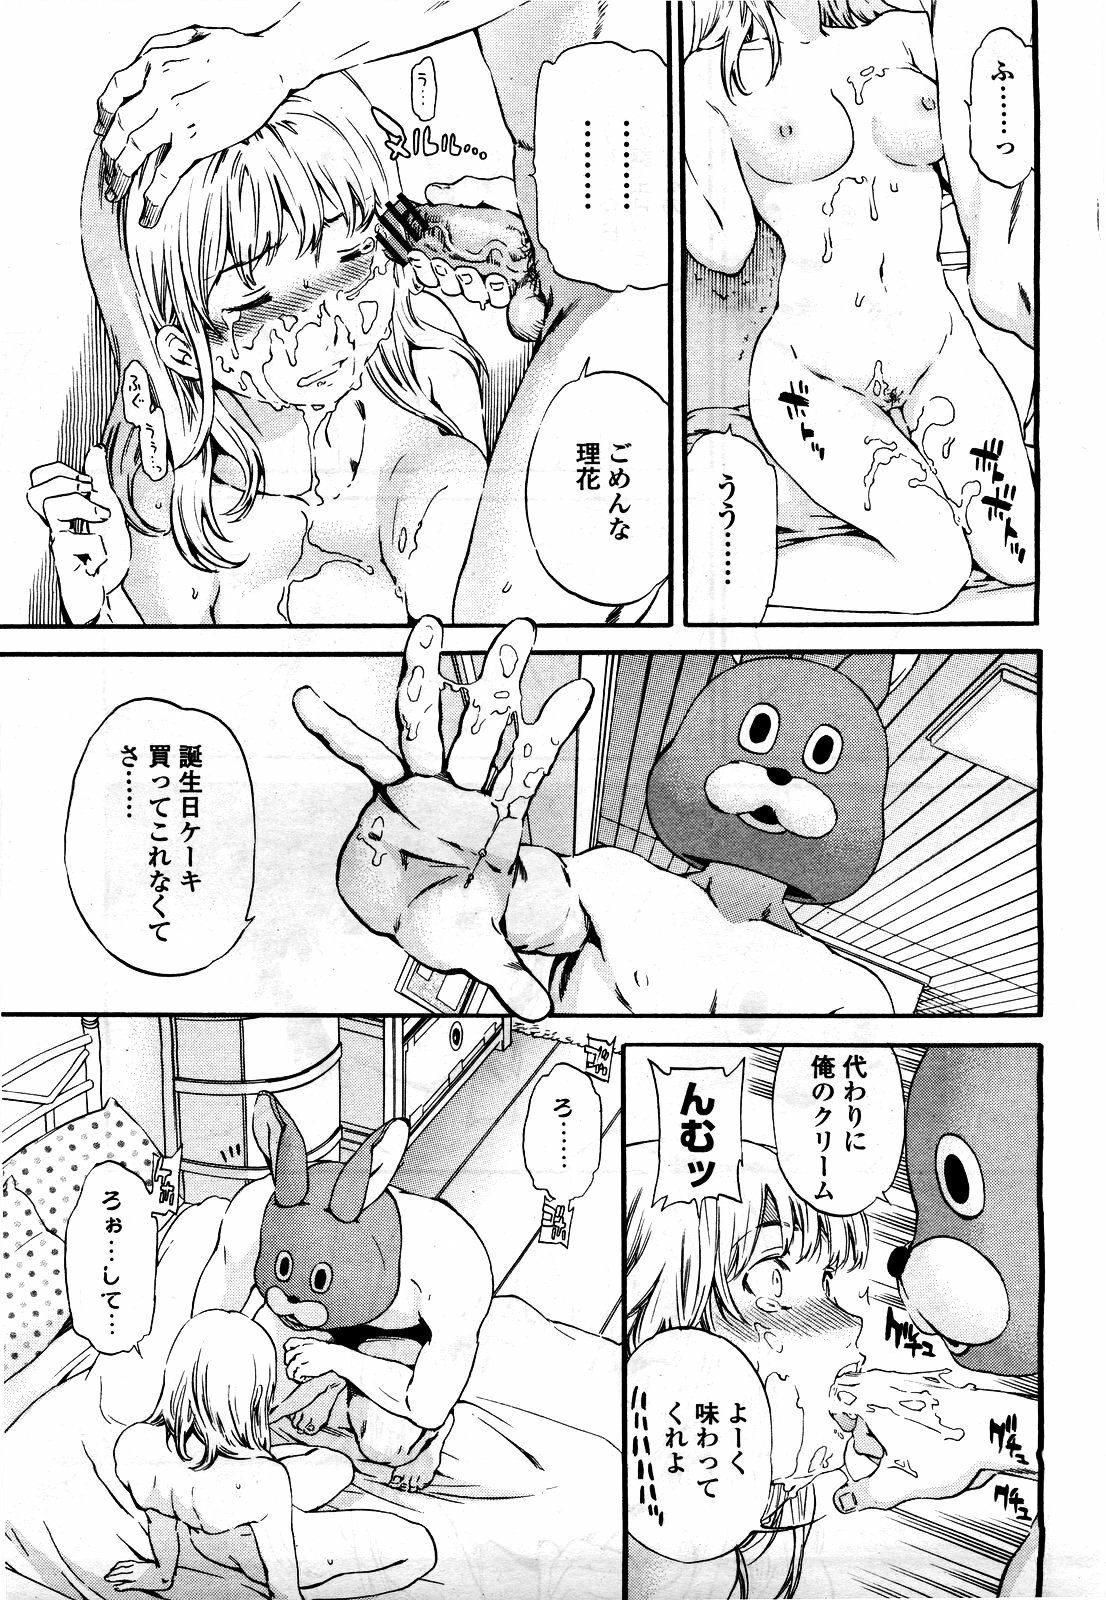 COMIC Momohime 2010-06 page 37 full